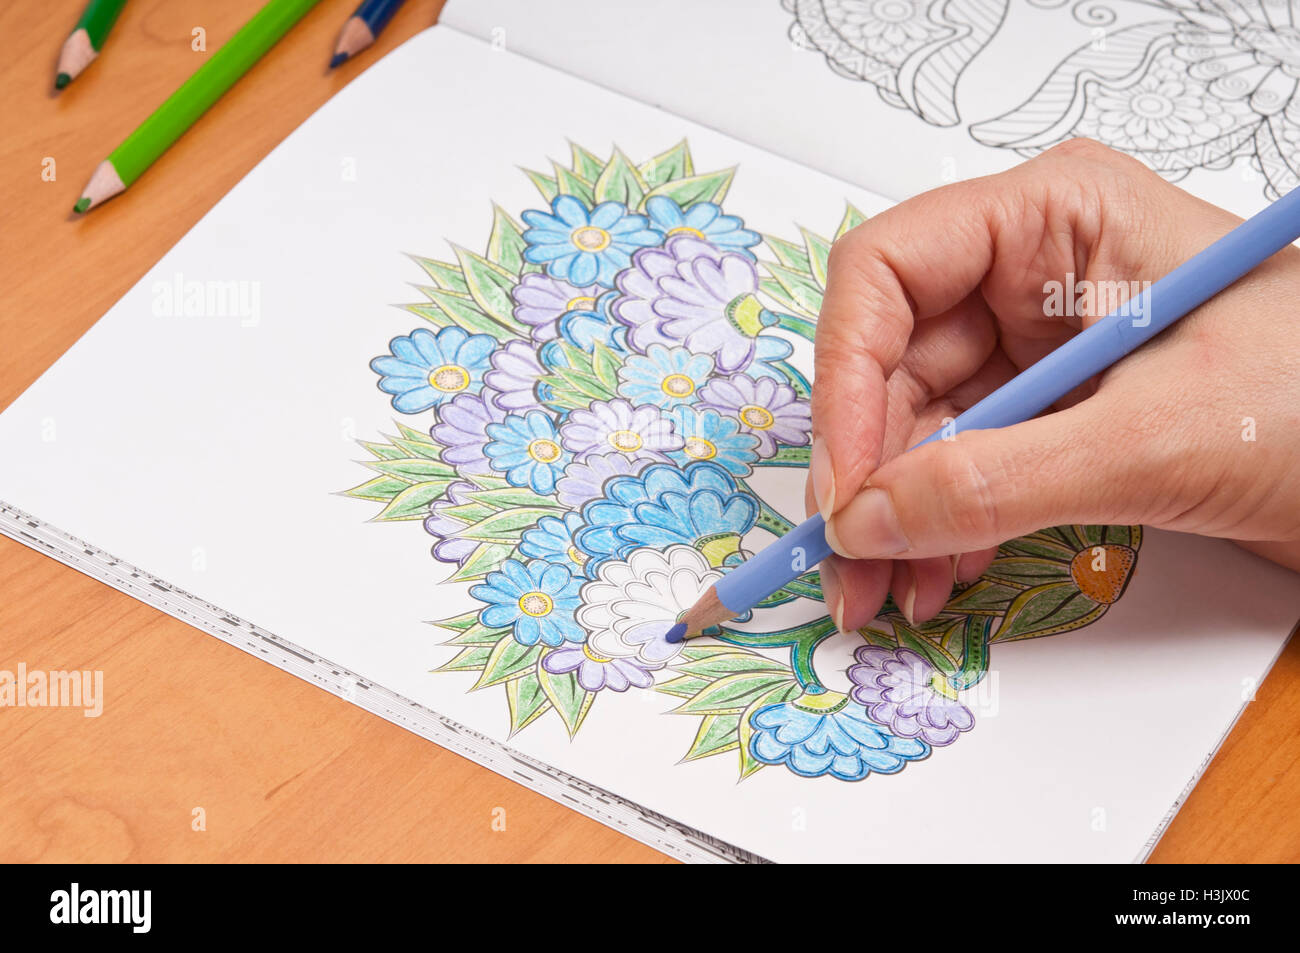 woman working on a colouring book for adults Stock Photo